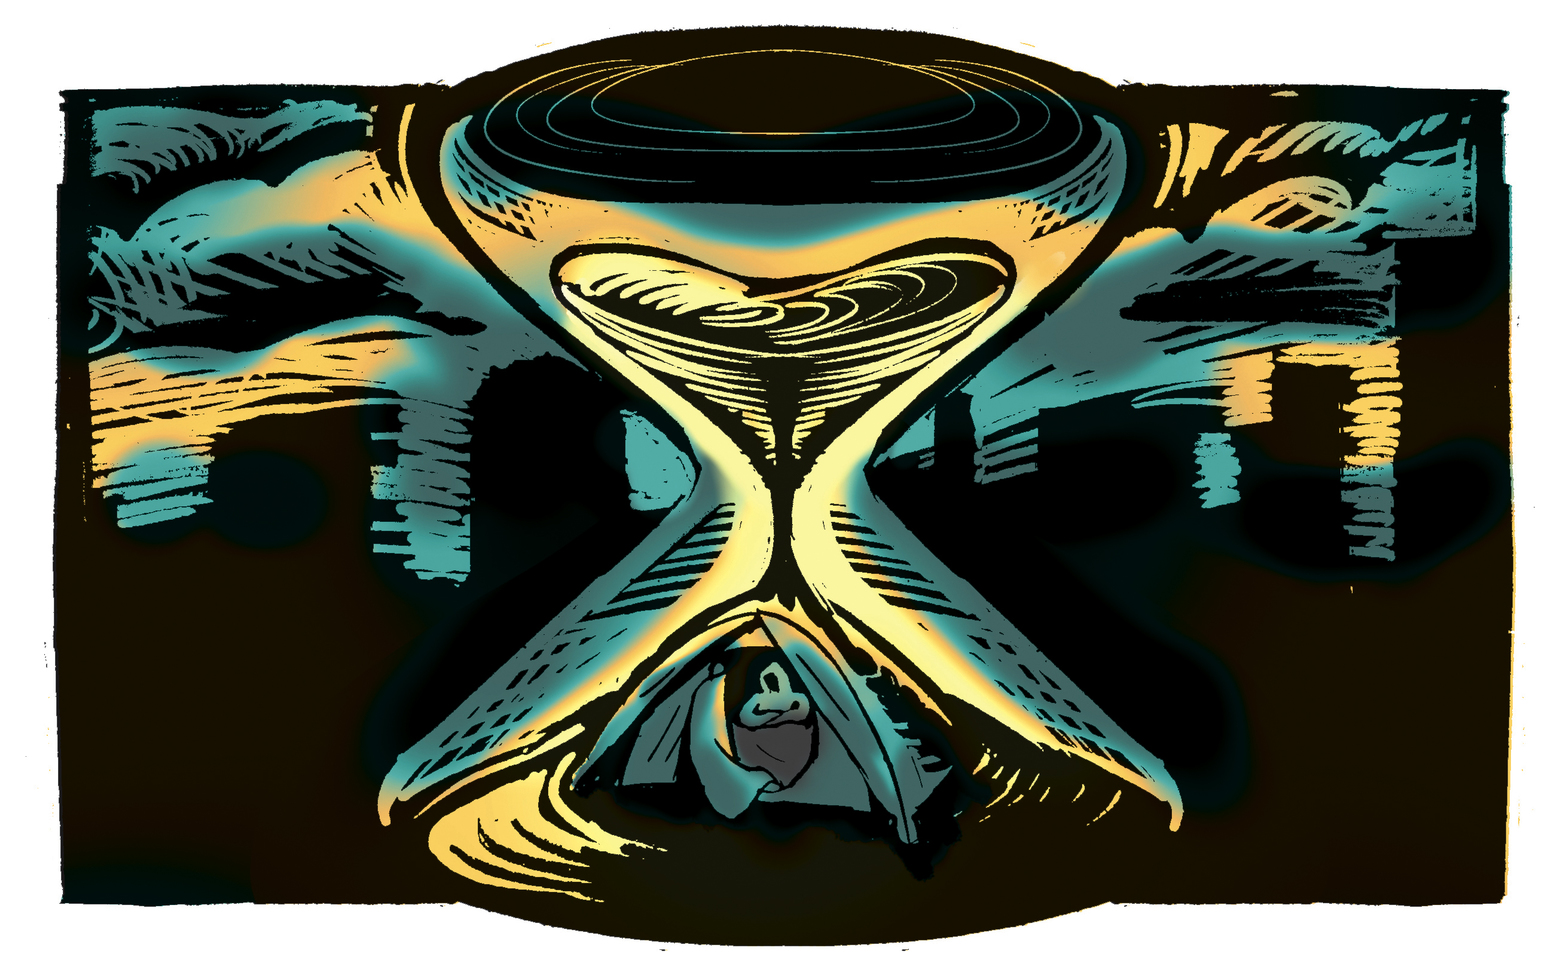 Teal And Yellow Graphic Of Sand Timer With Homeless Tent In The Bottom With City Skyline In Background